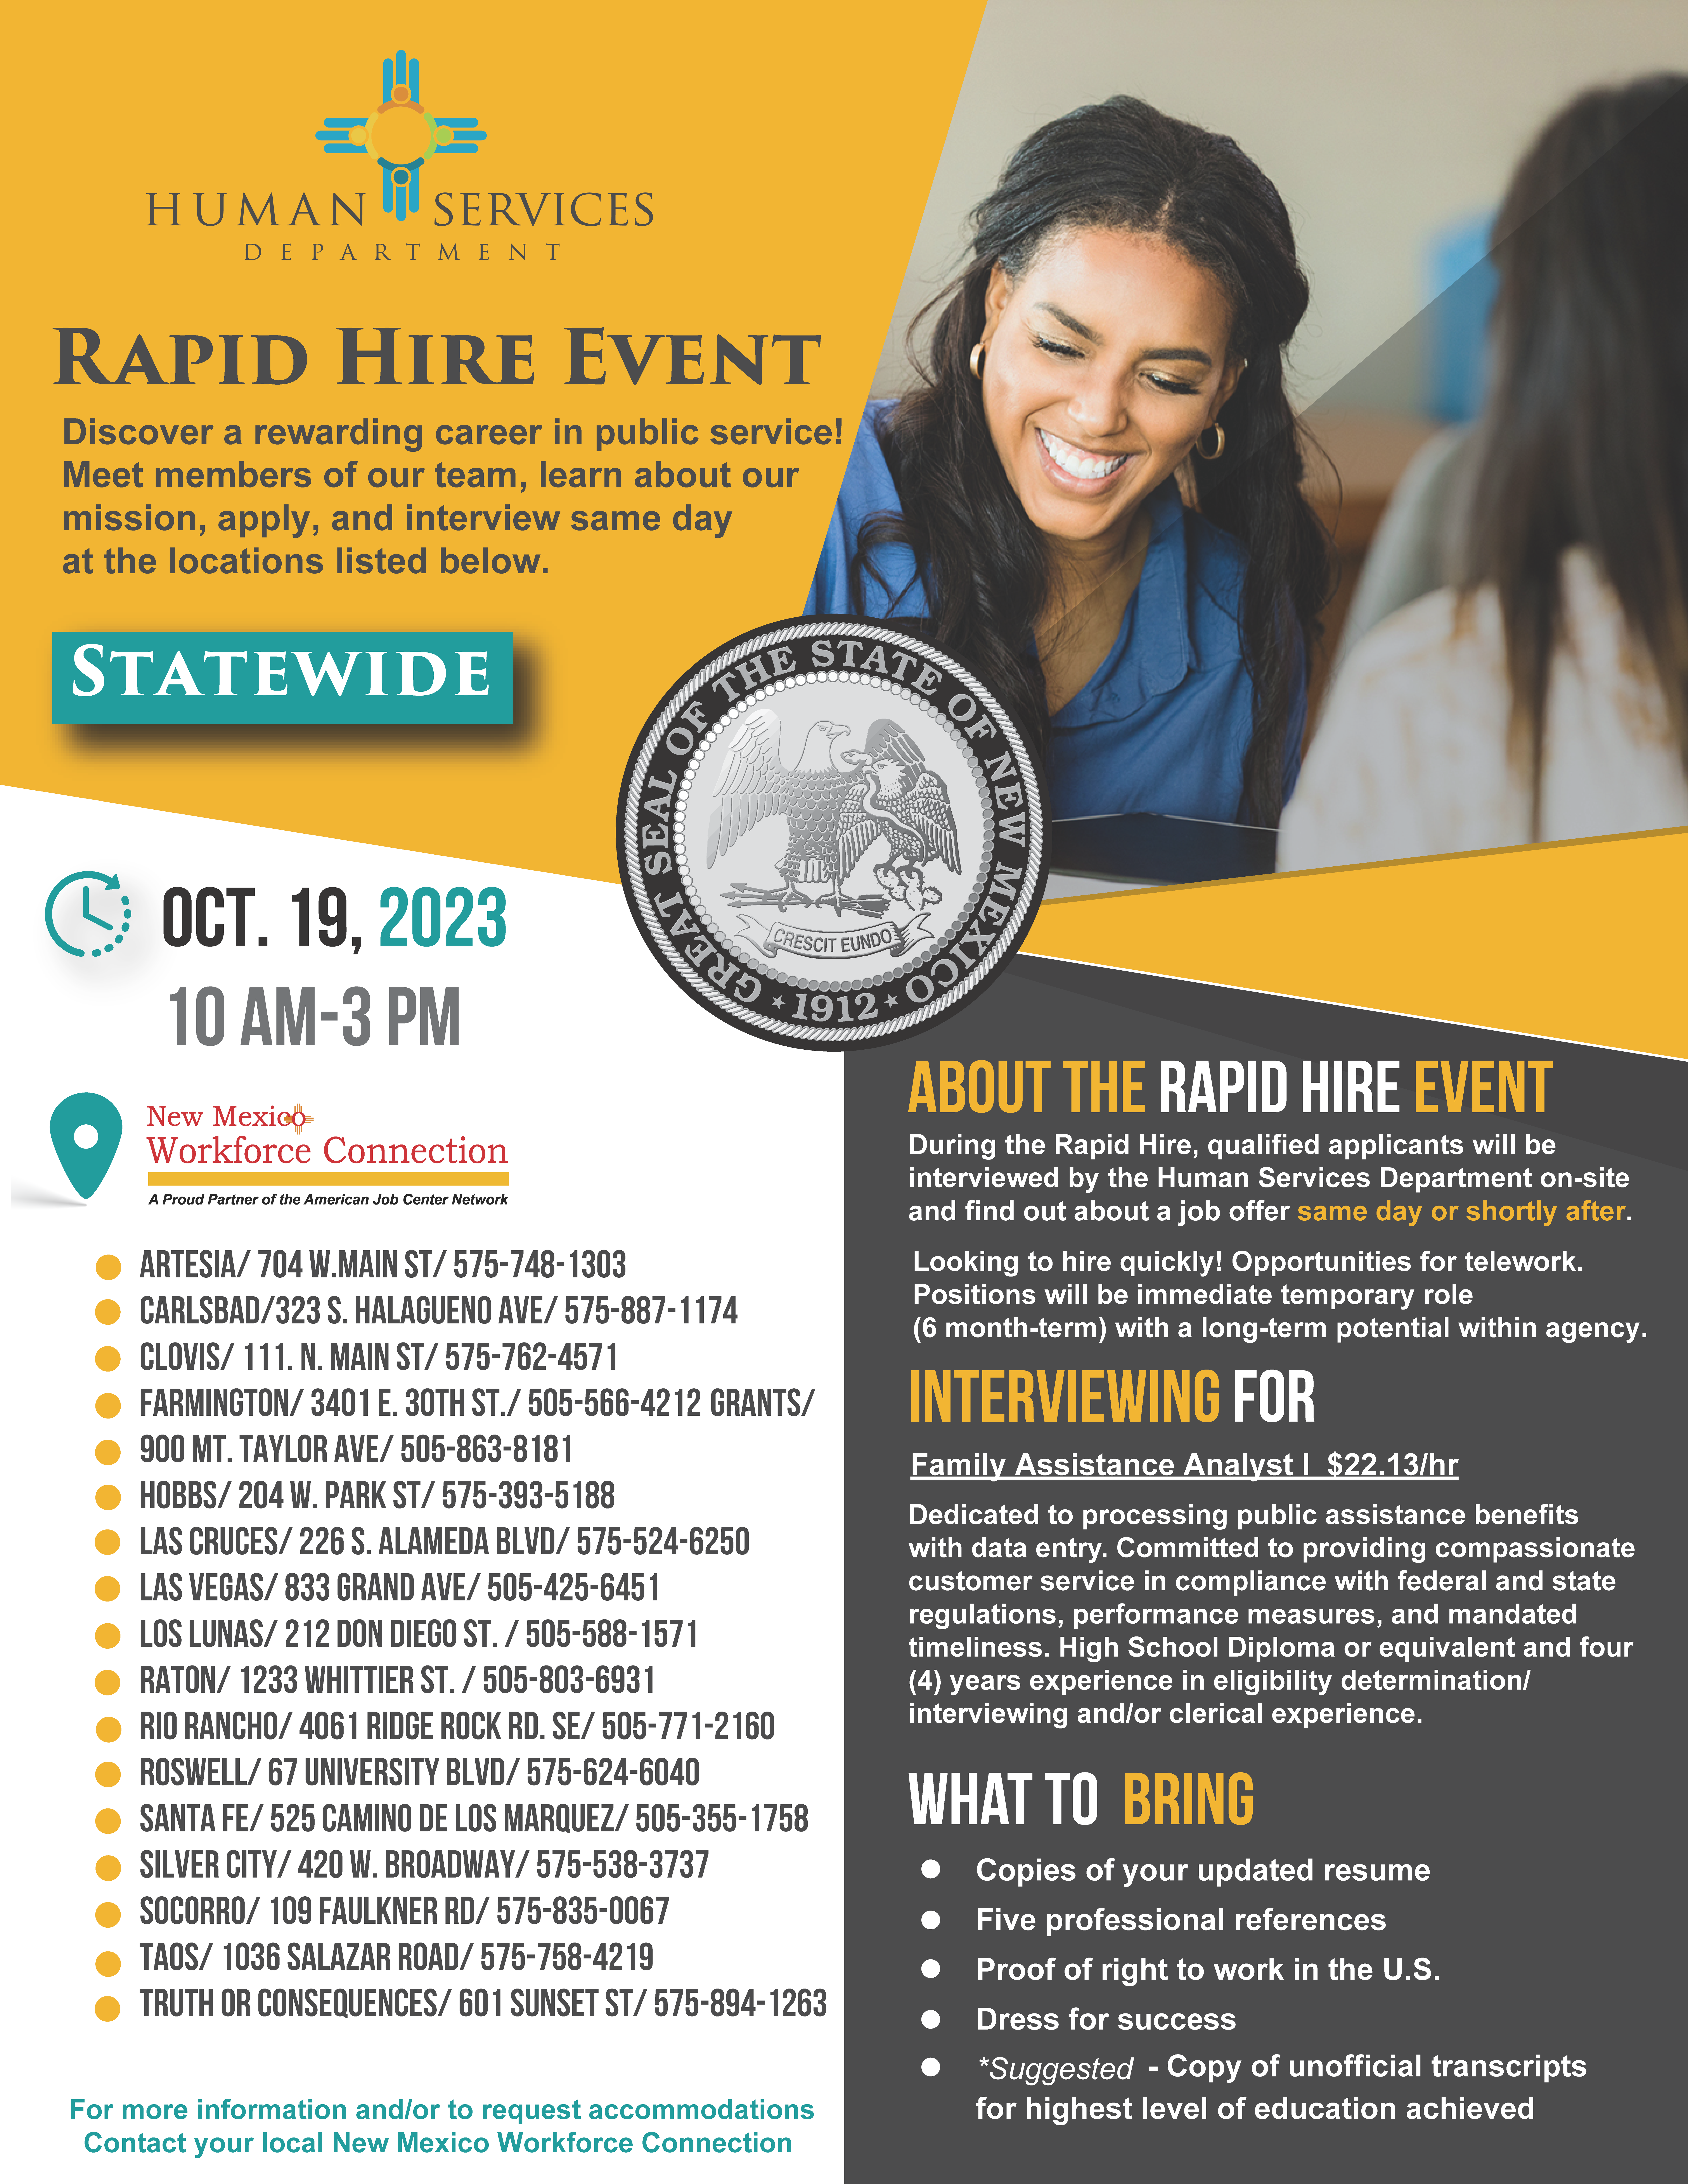 Human Services Department NM Rapid Hire Event flyer